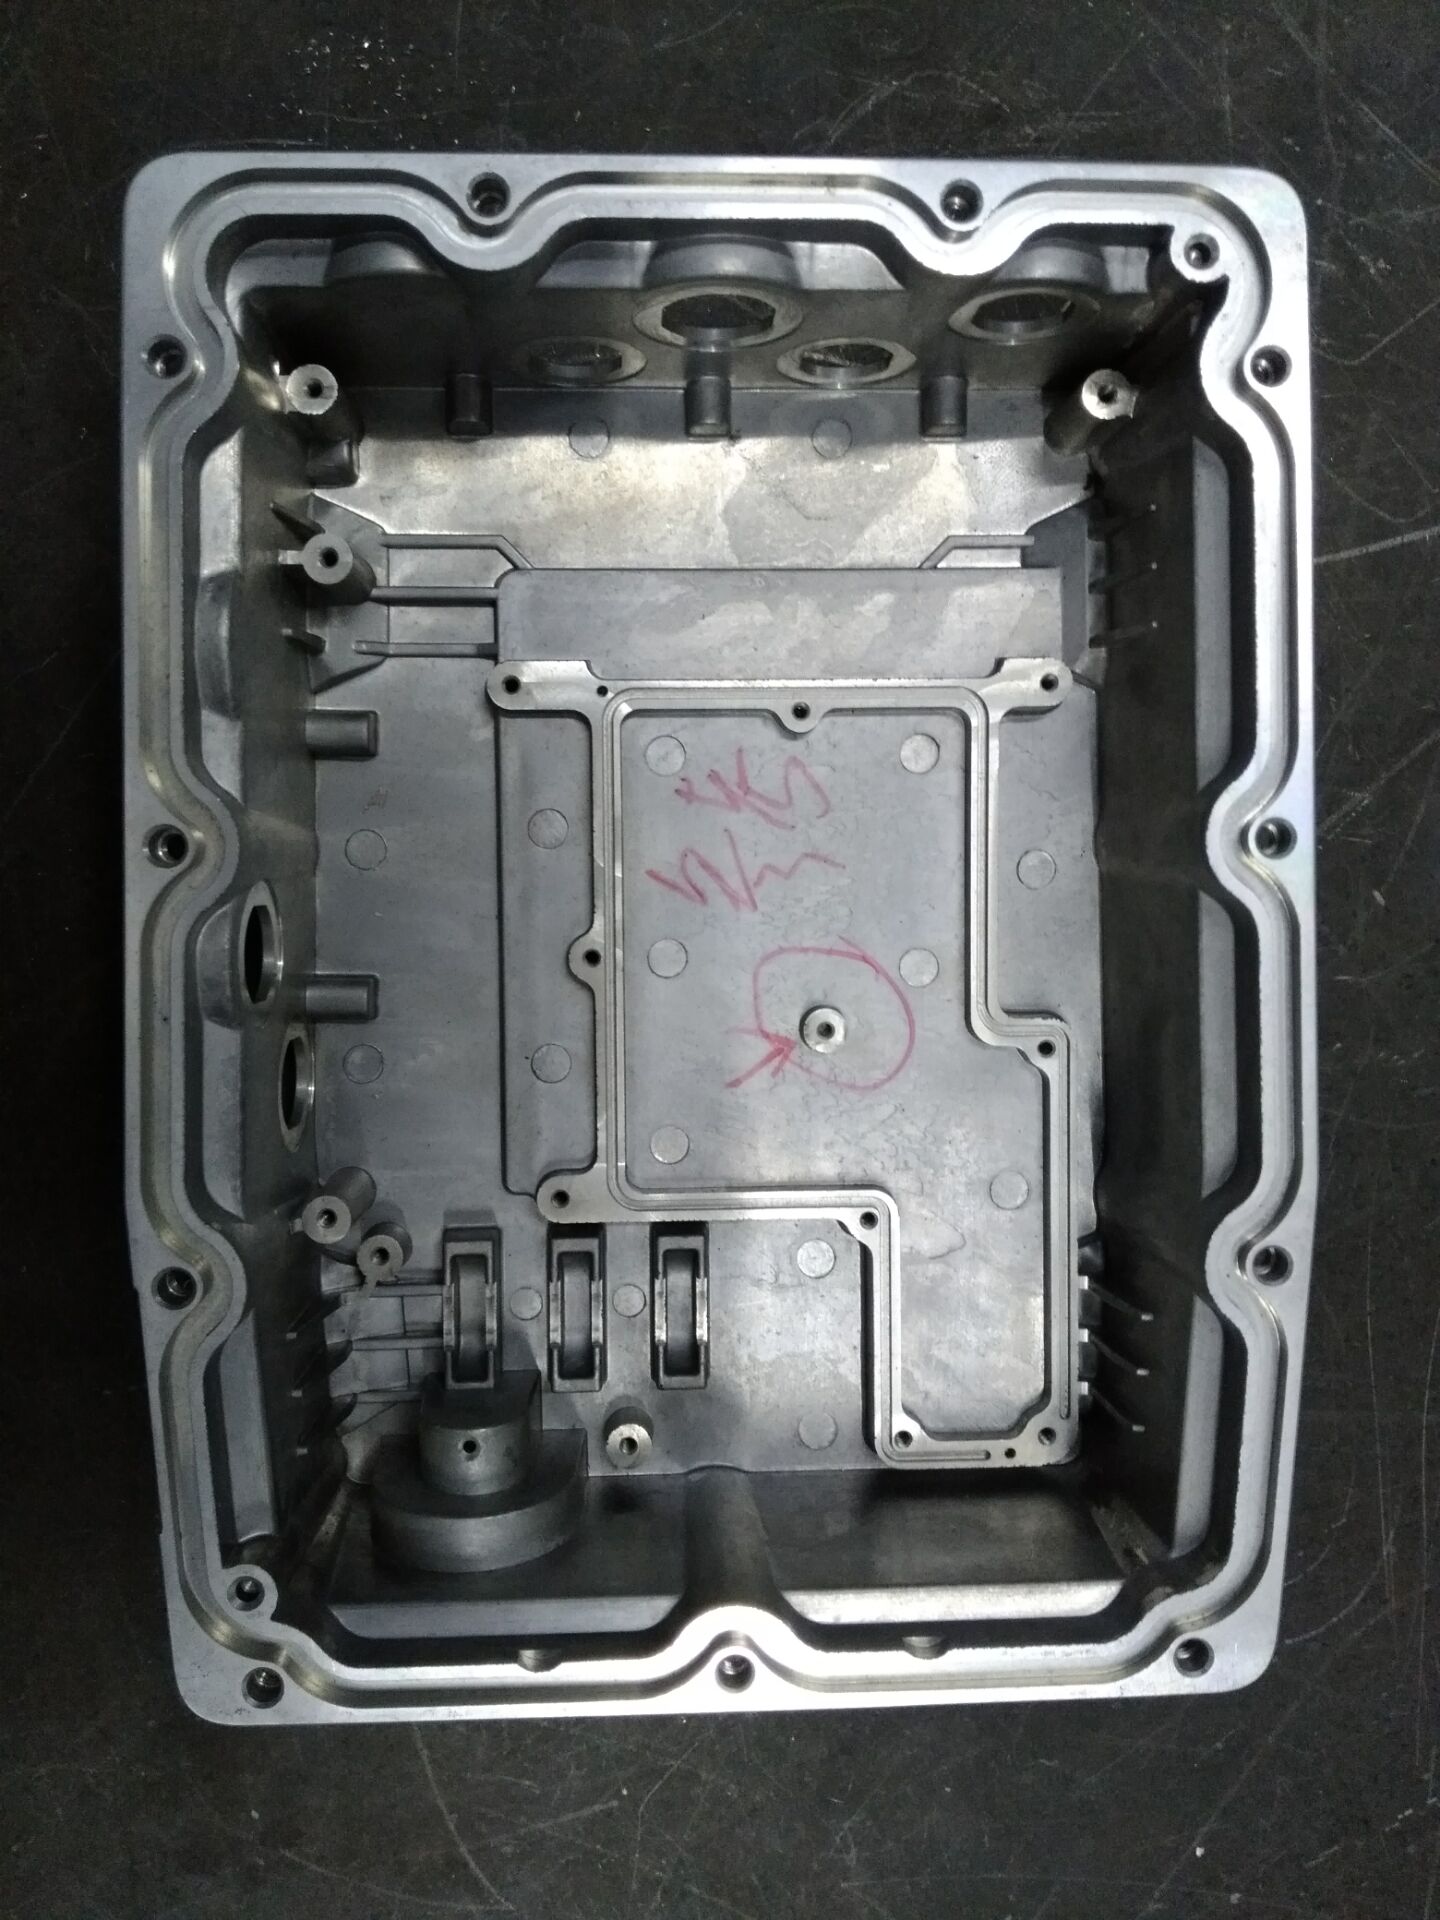 As a automotive plastic mold manufacturer, how long does it take to build an injection mold?